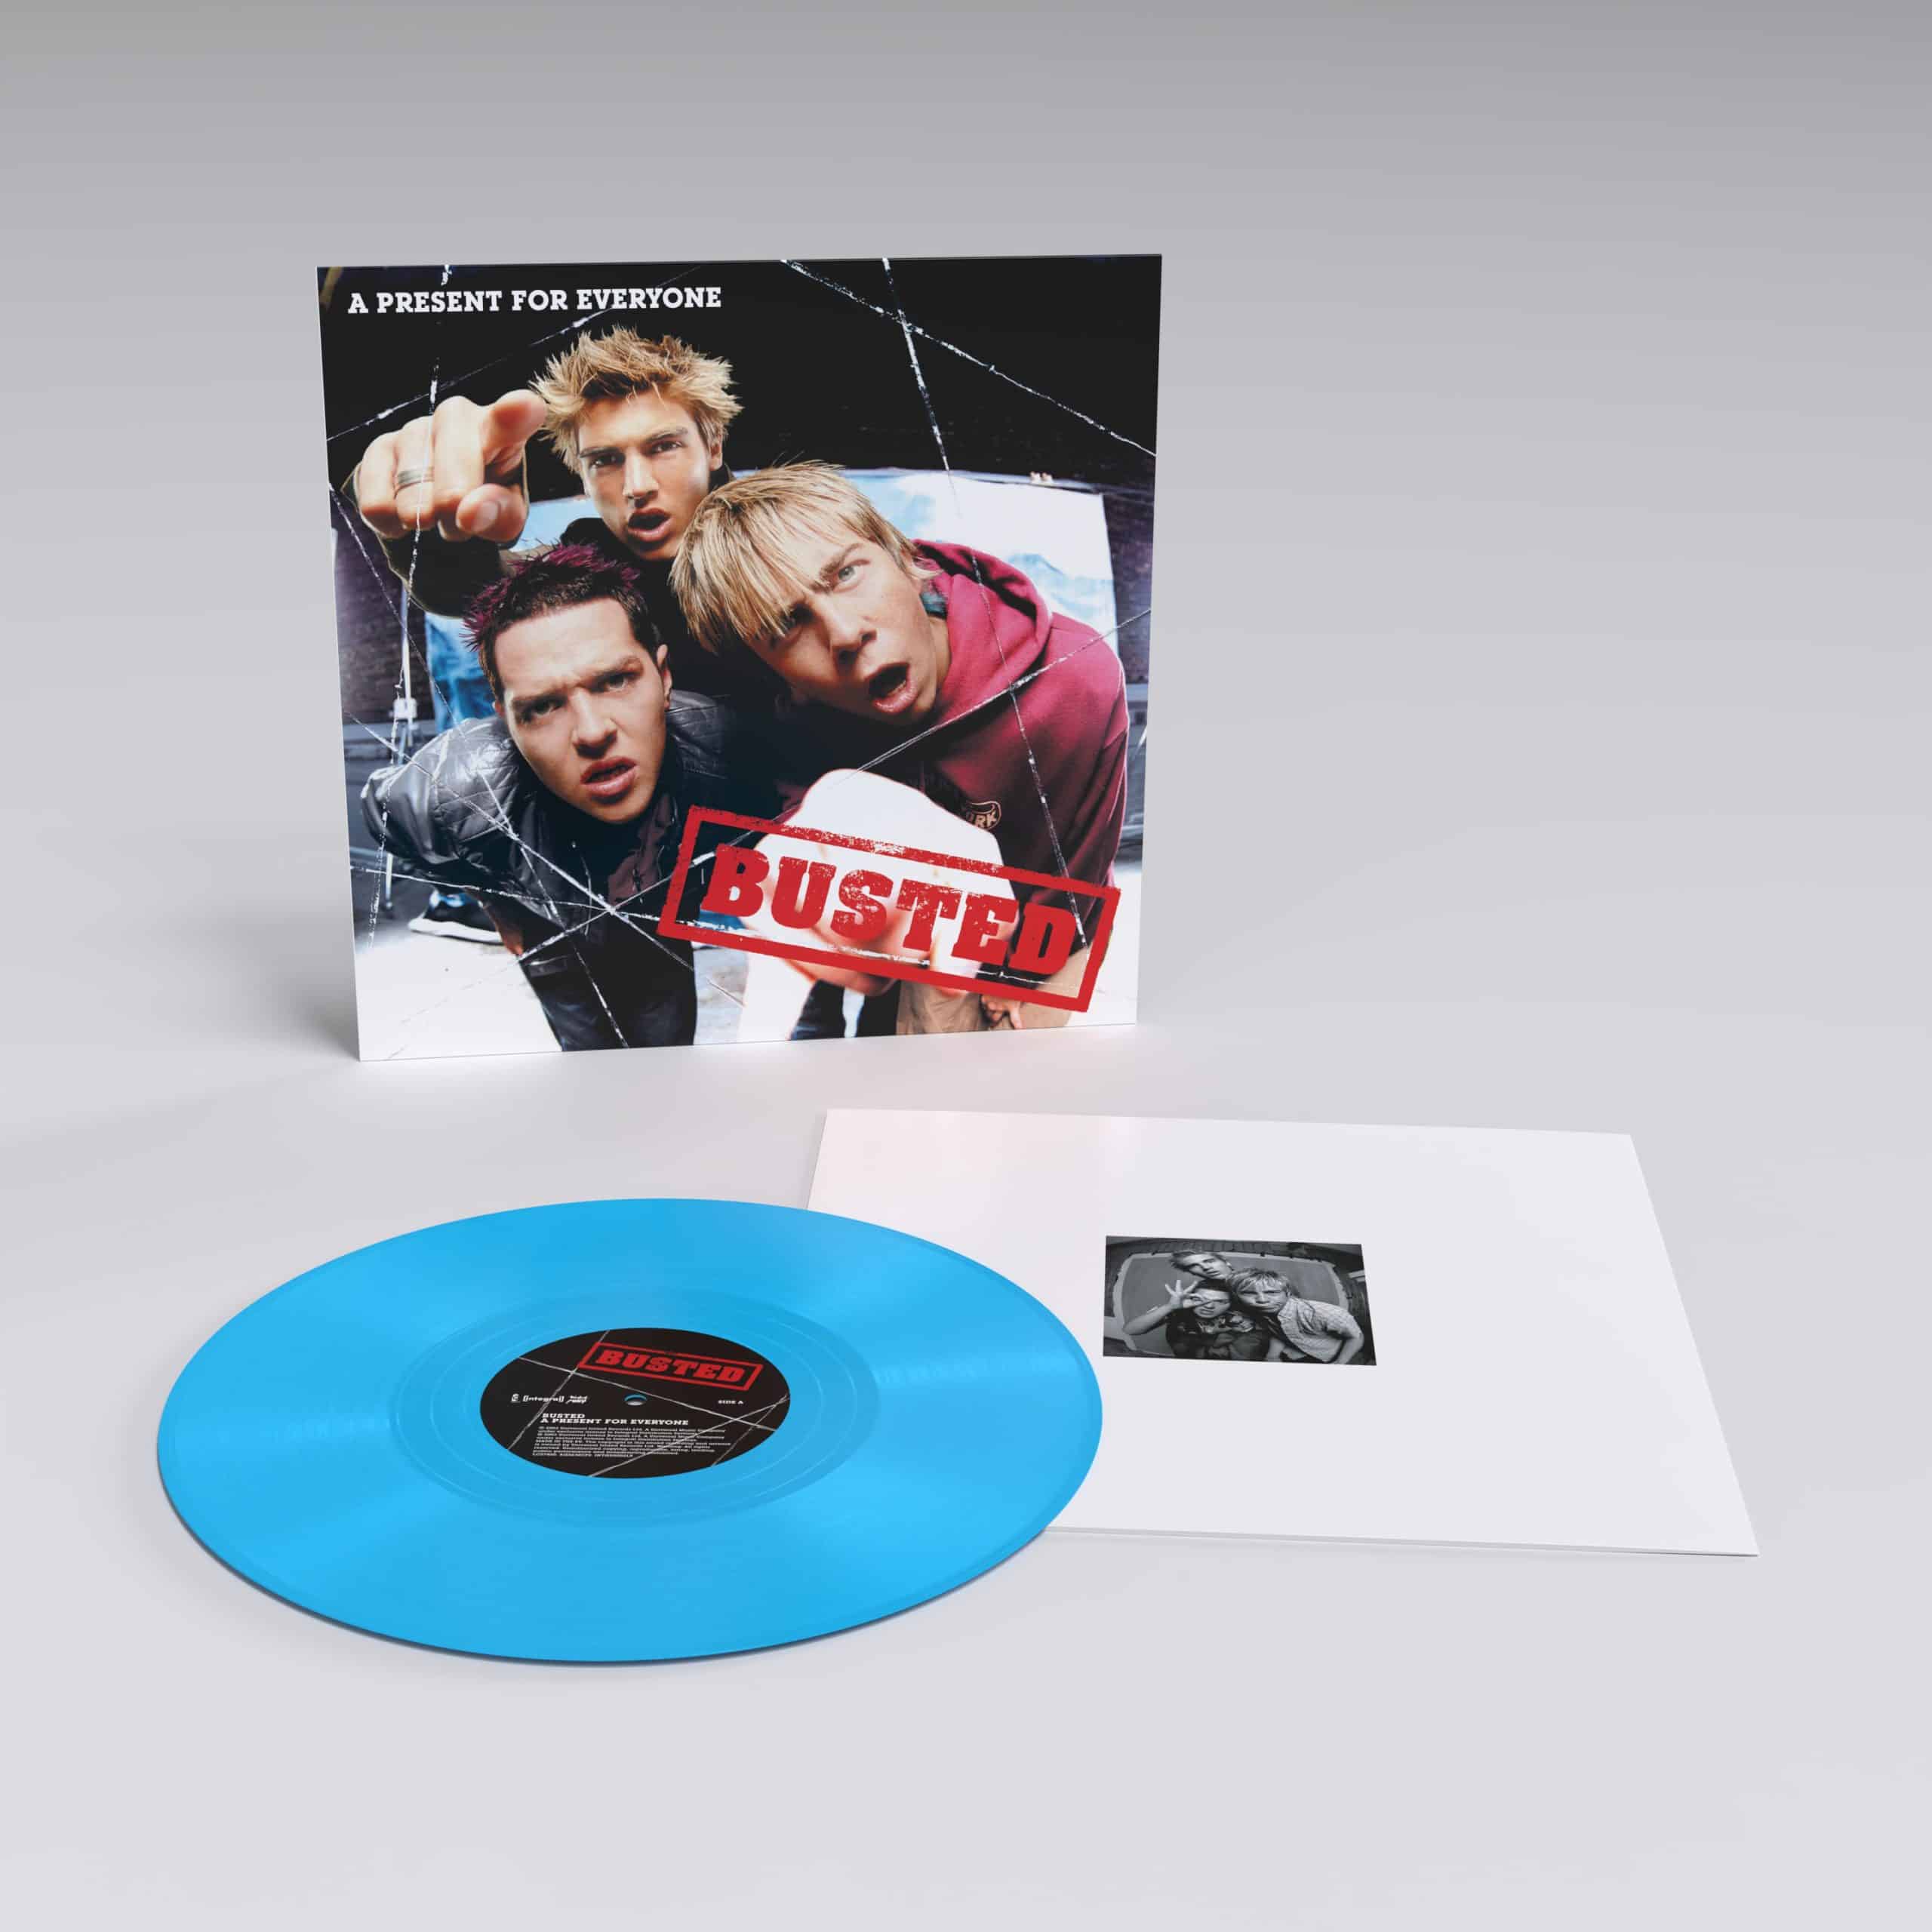 INTGDS002LP_-_Busted_-_A_Present_For_Everyone_v2.jpg